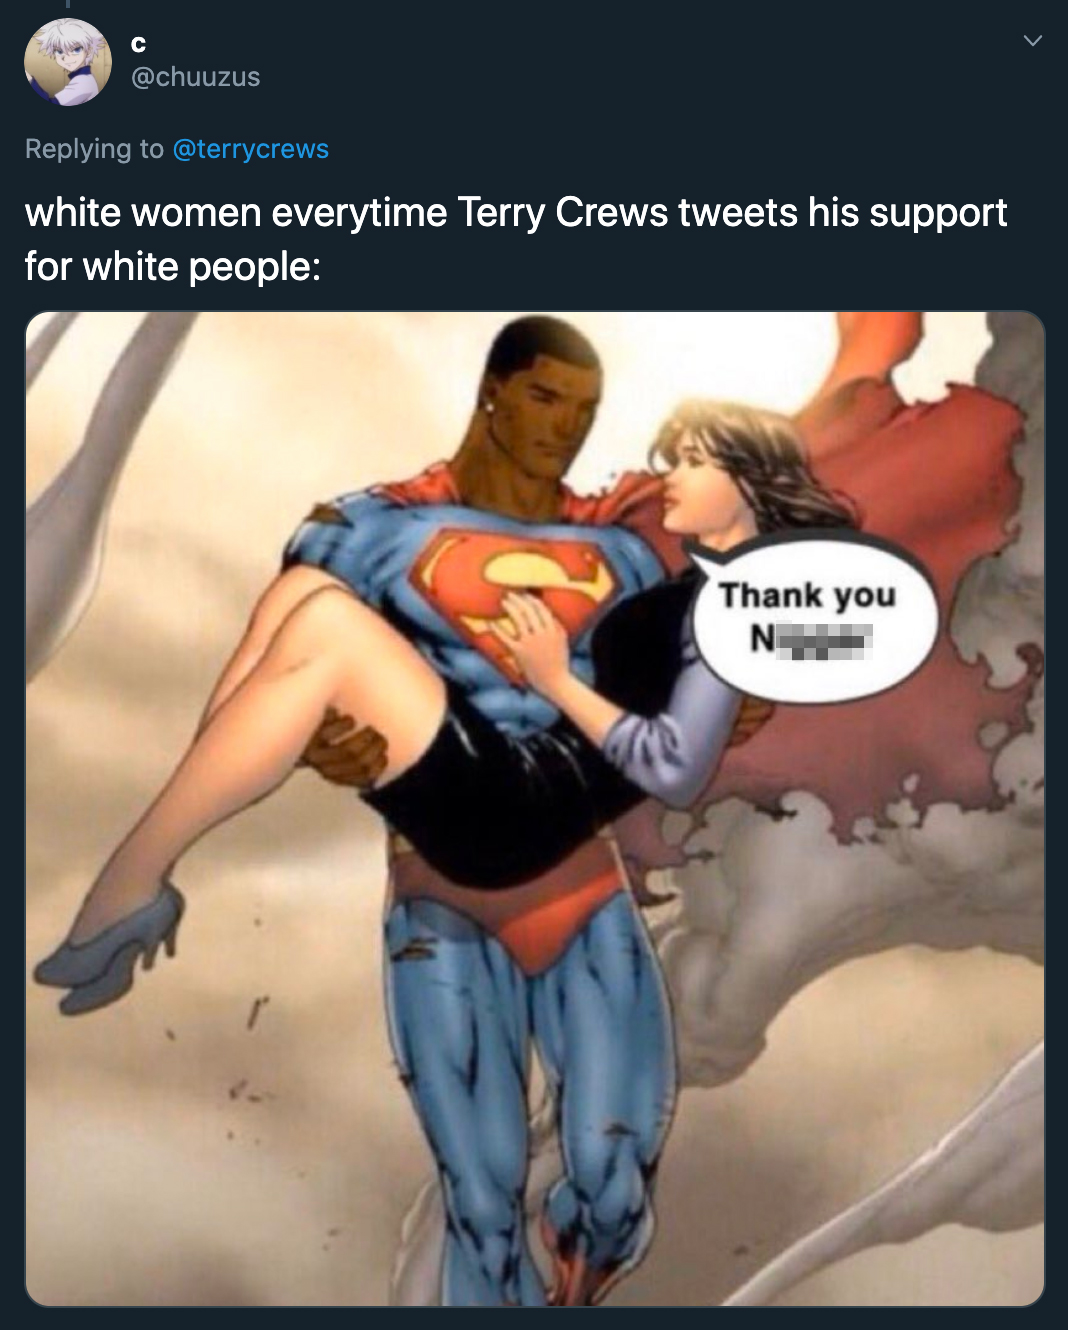 black superman lois lane - white women every time Terry Crews tweets his support for white people Thank you N